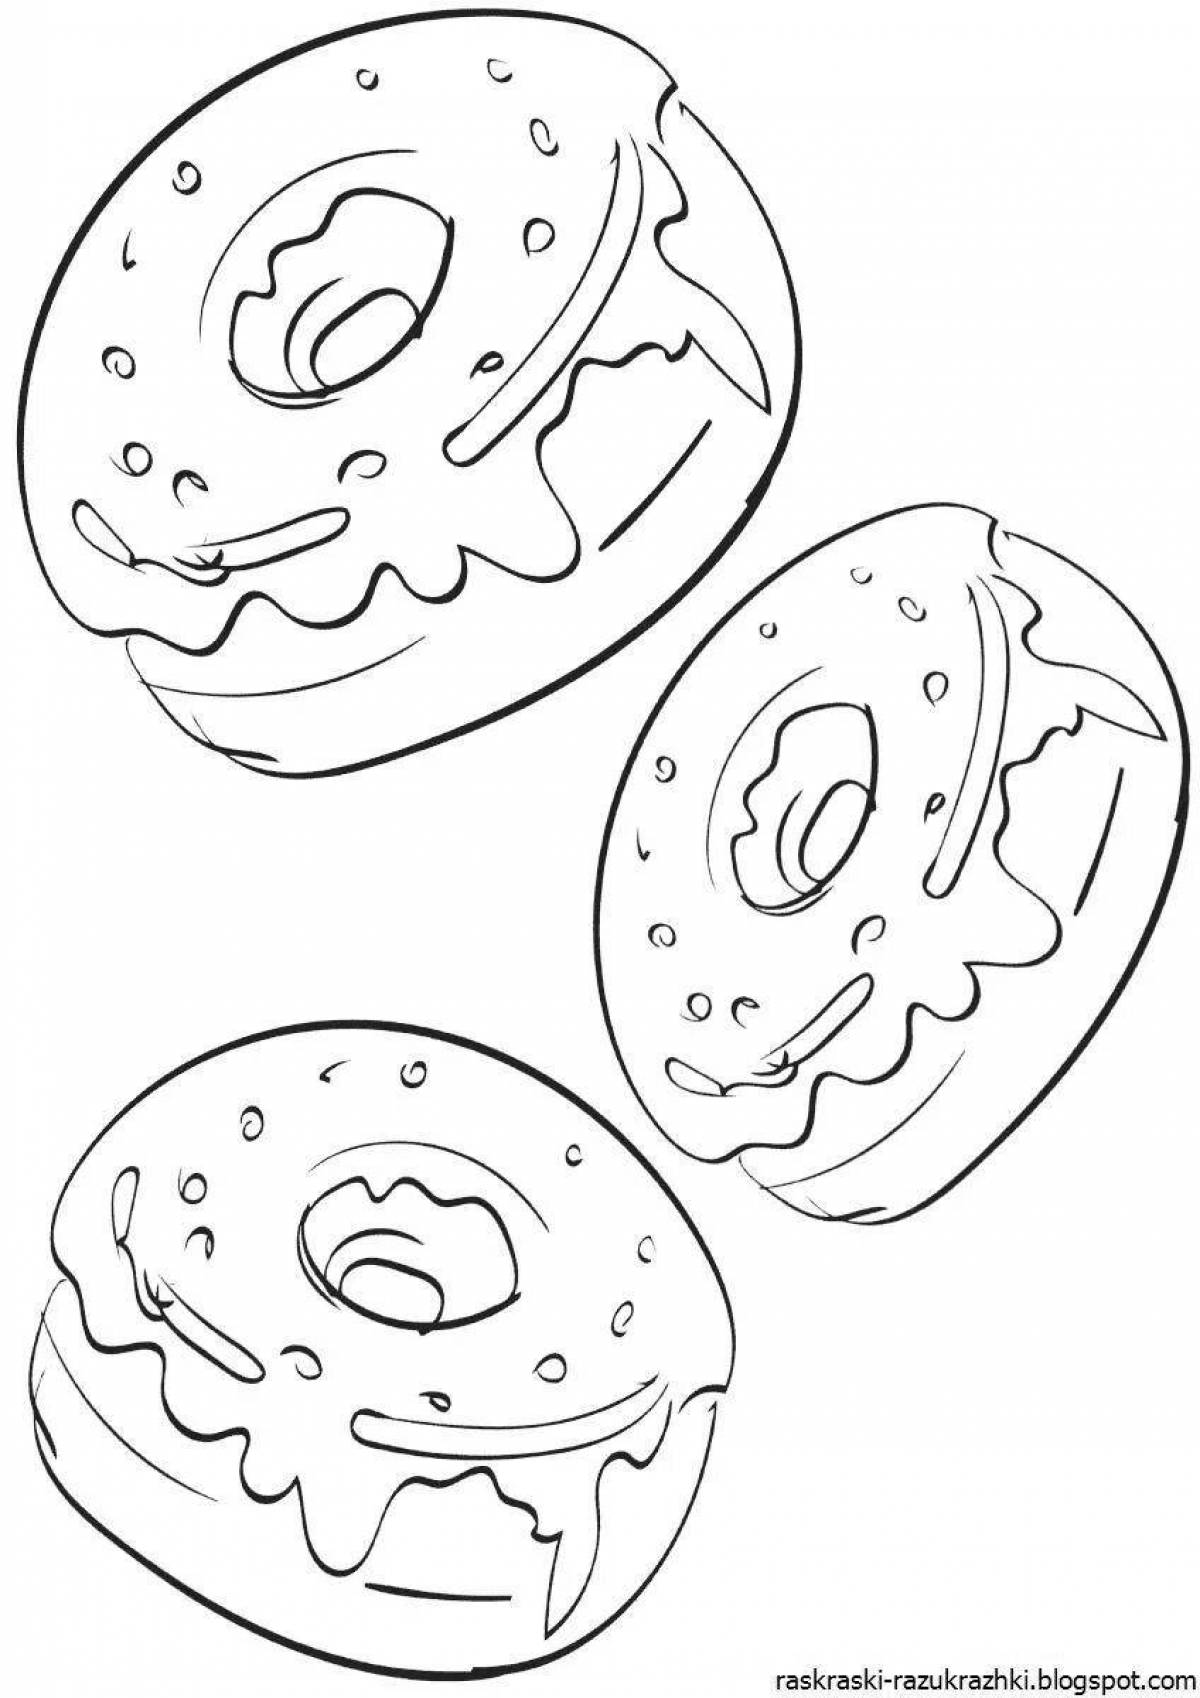 Colourful donut coloring for girls